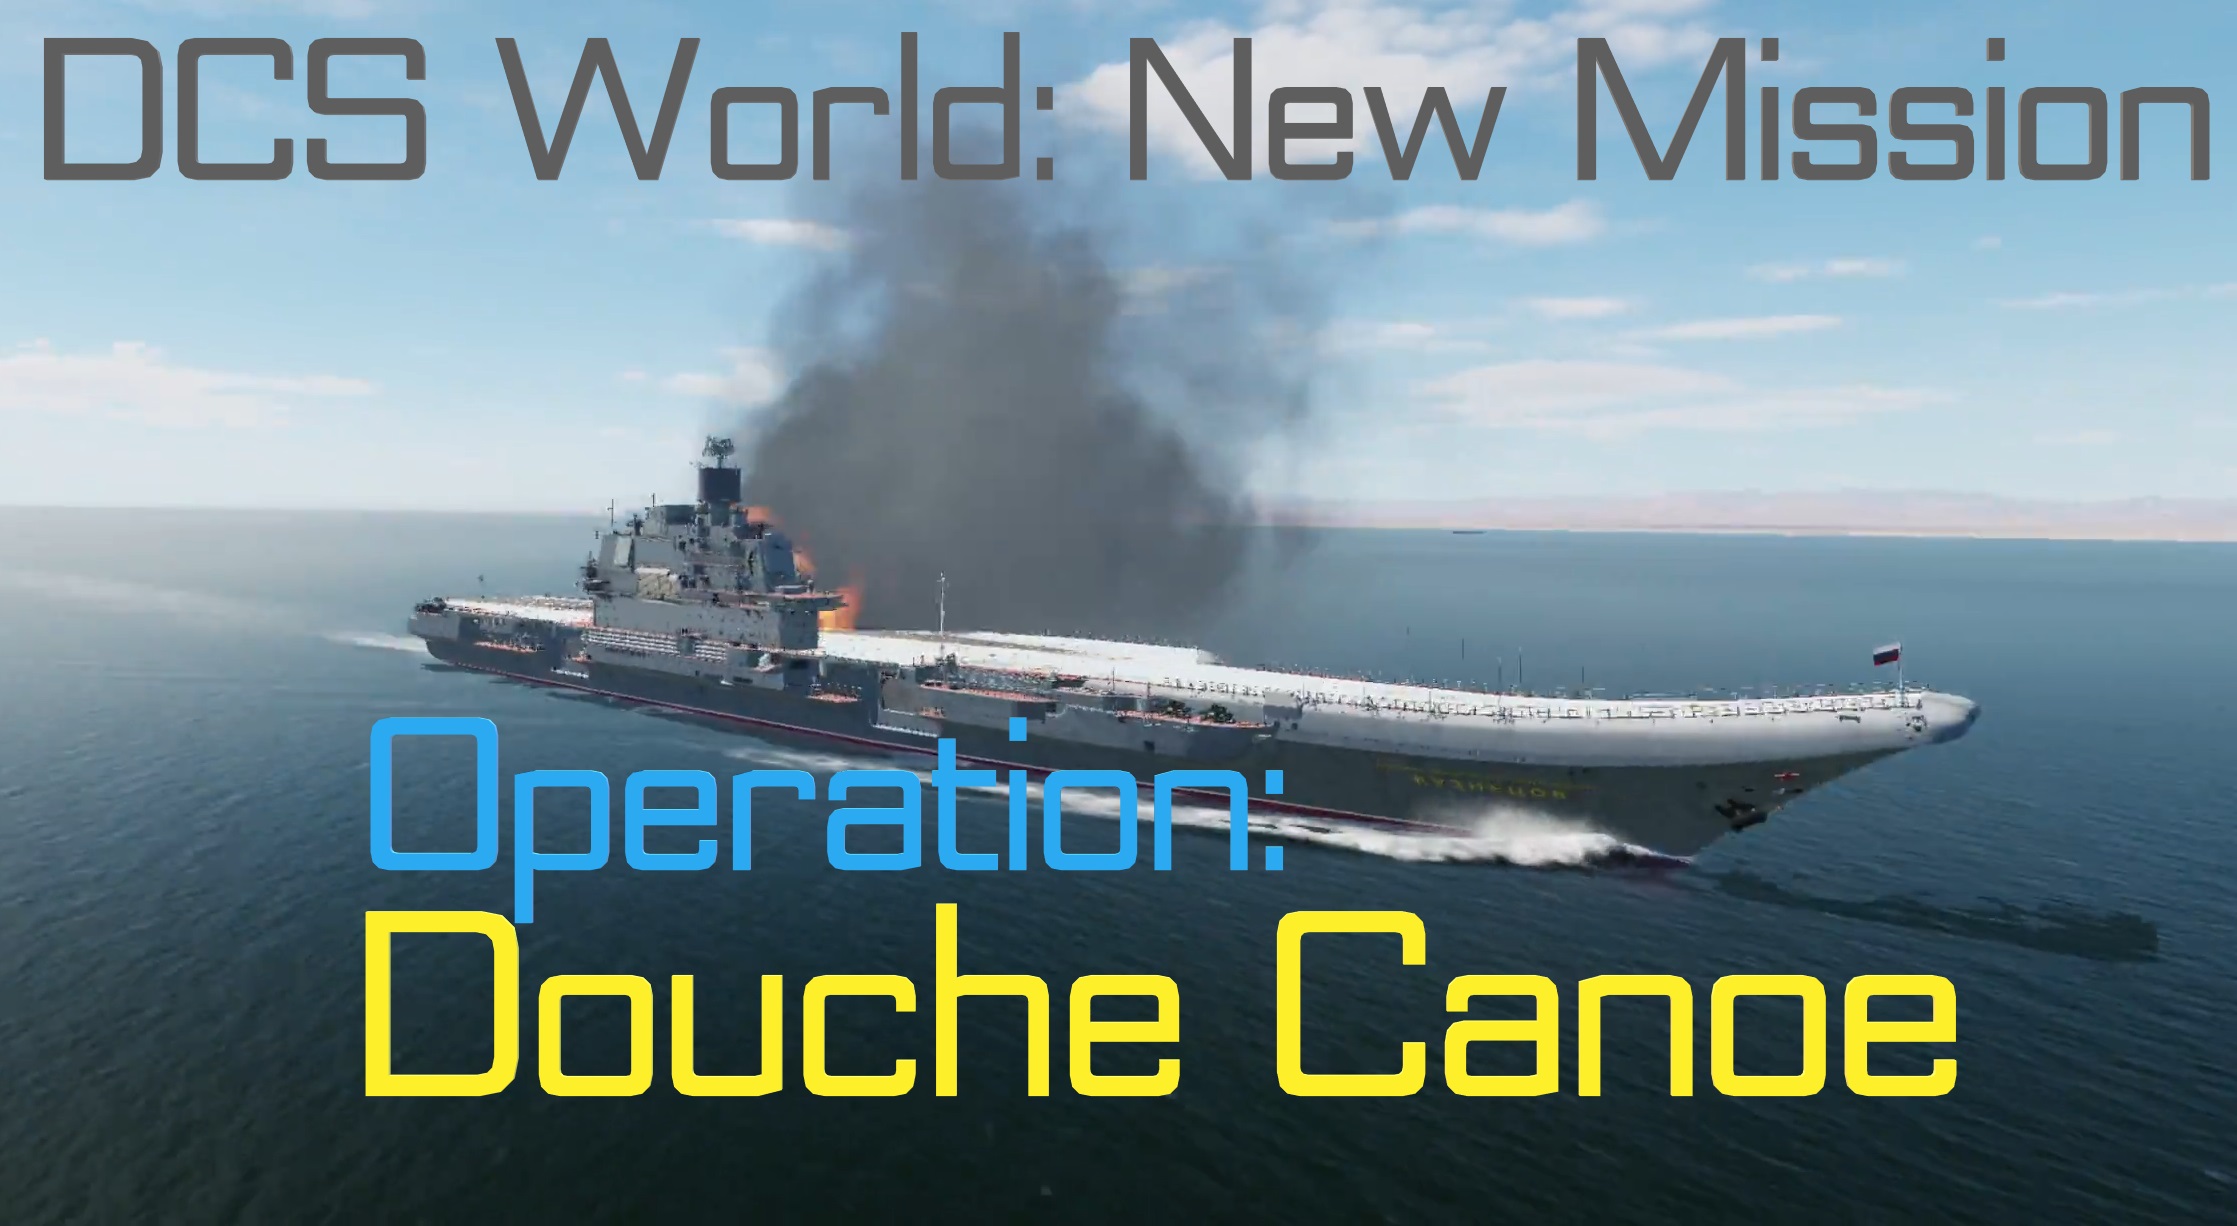 Sink the Russian Carrier: Operation Douche Canoe